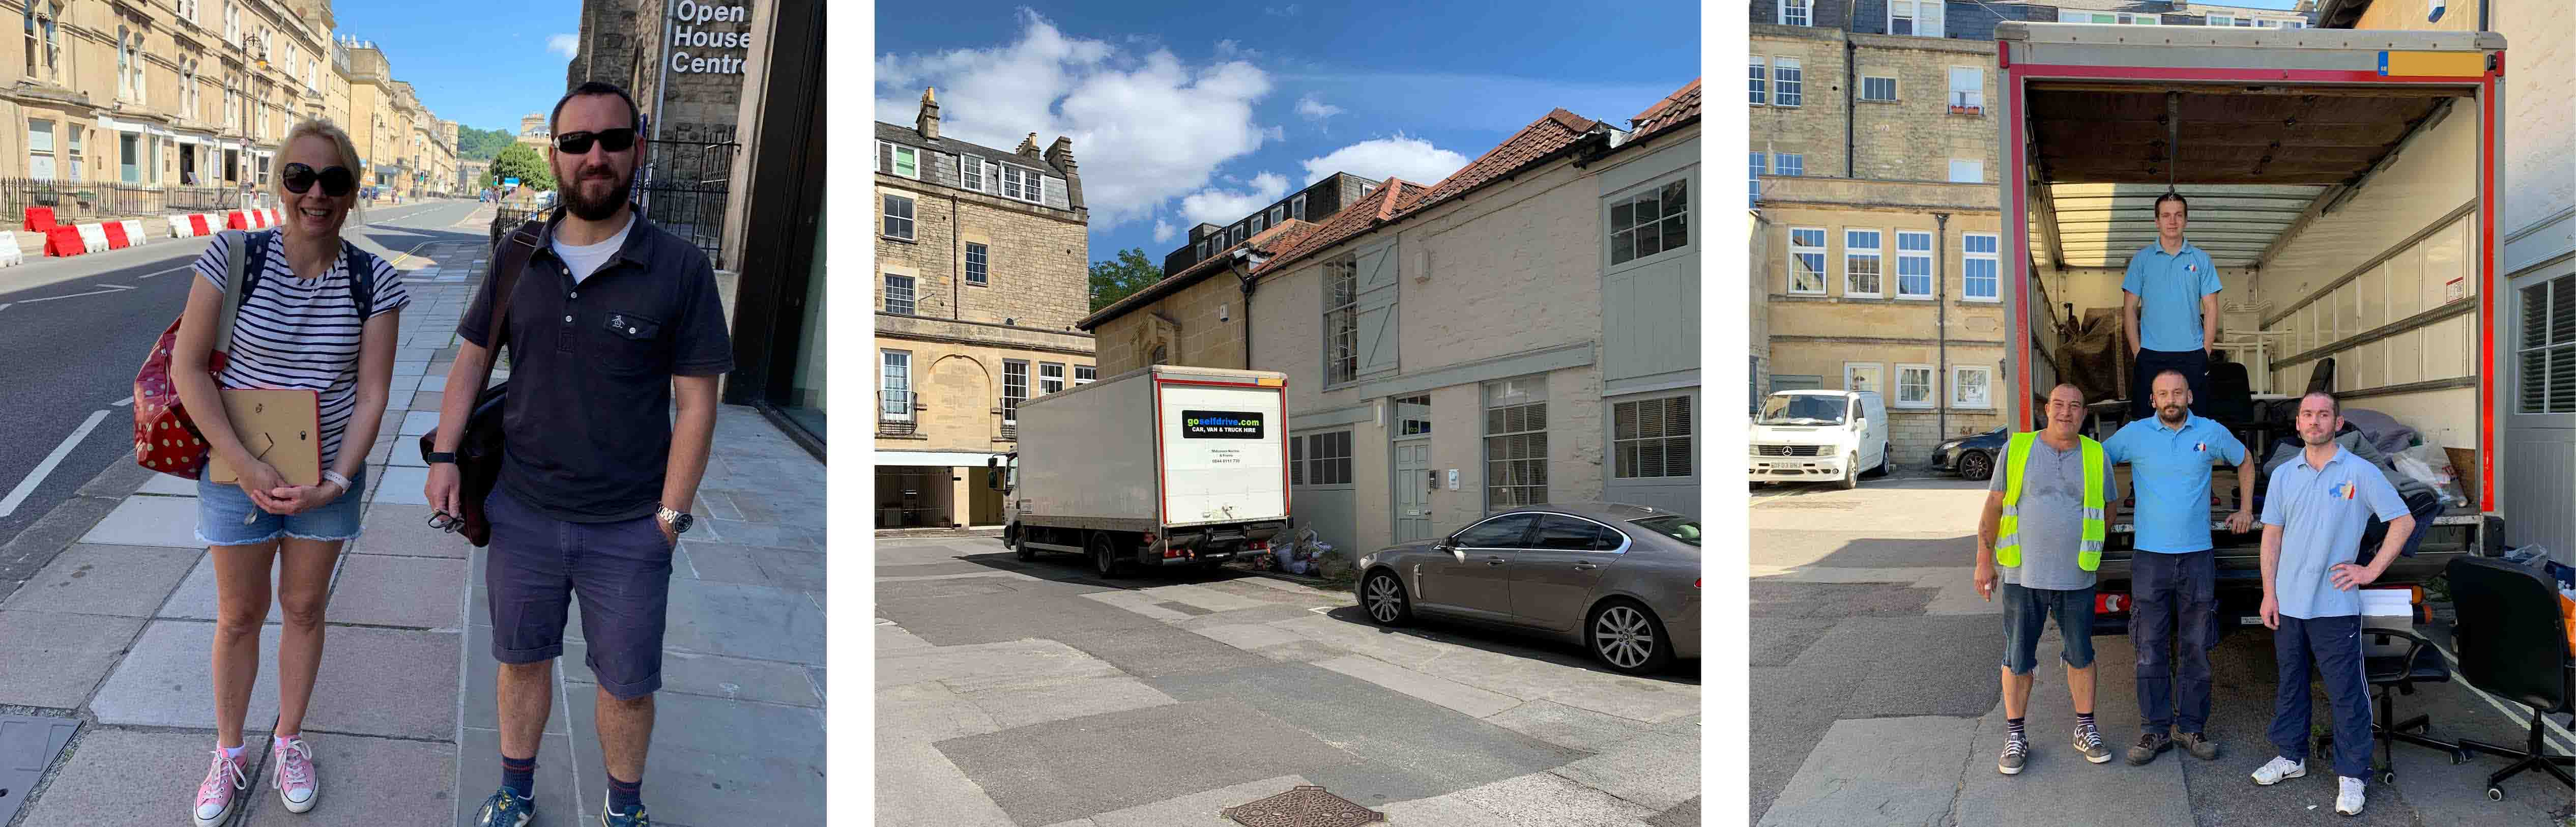 James and Rebecca oversaw the Seccl office move from Pulteney Mews to Manvers Street...